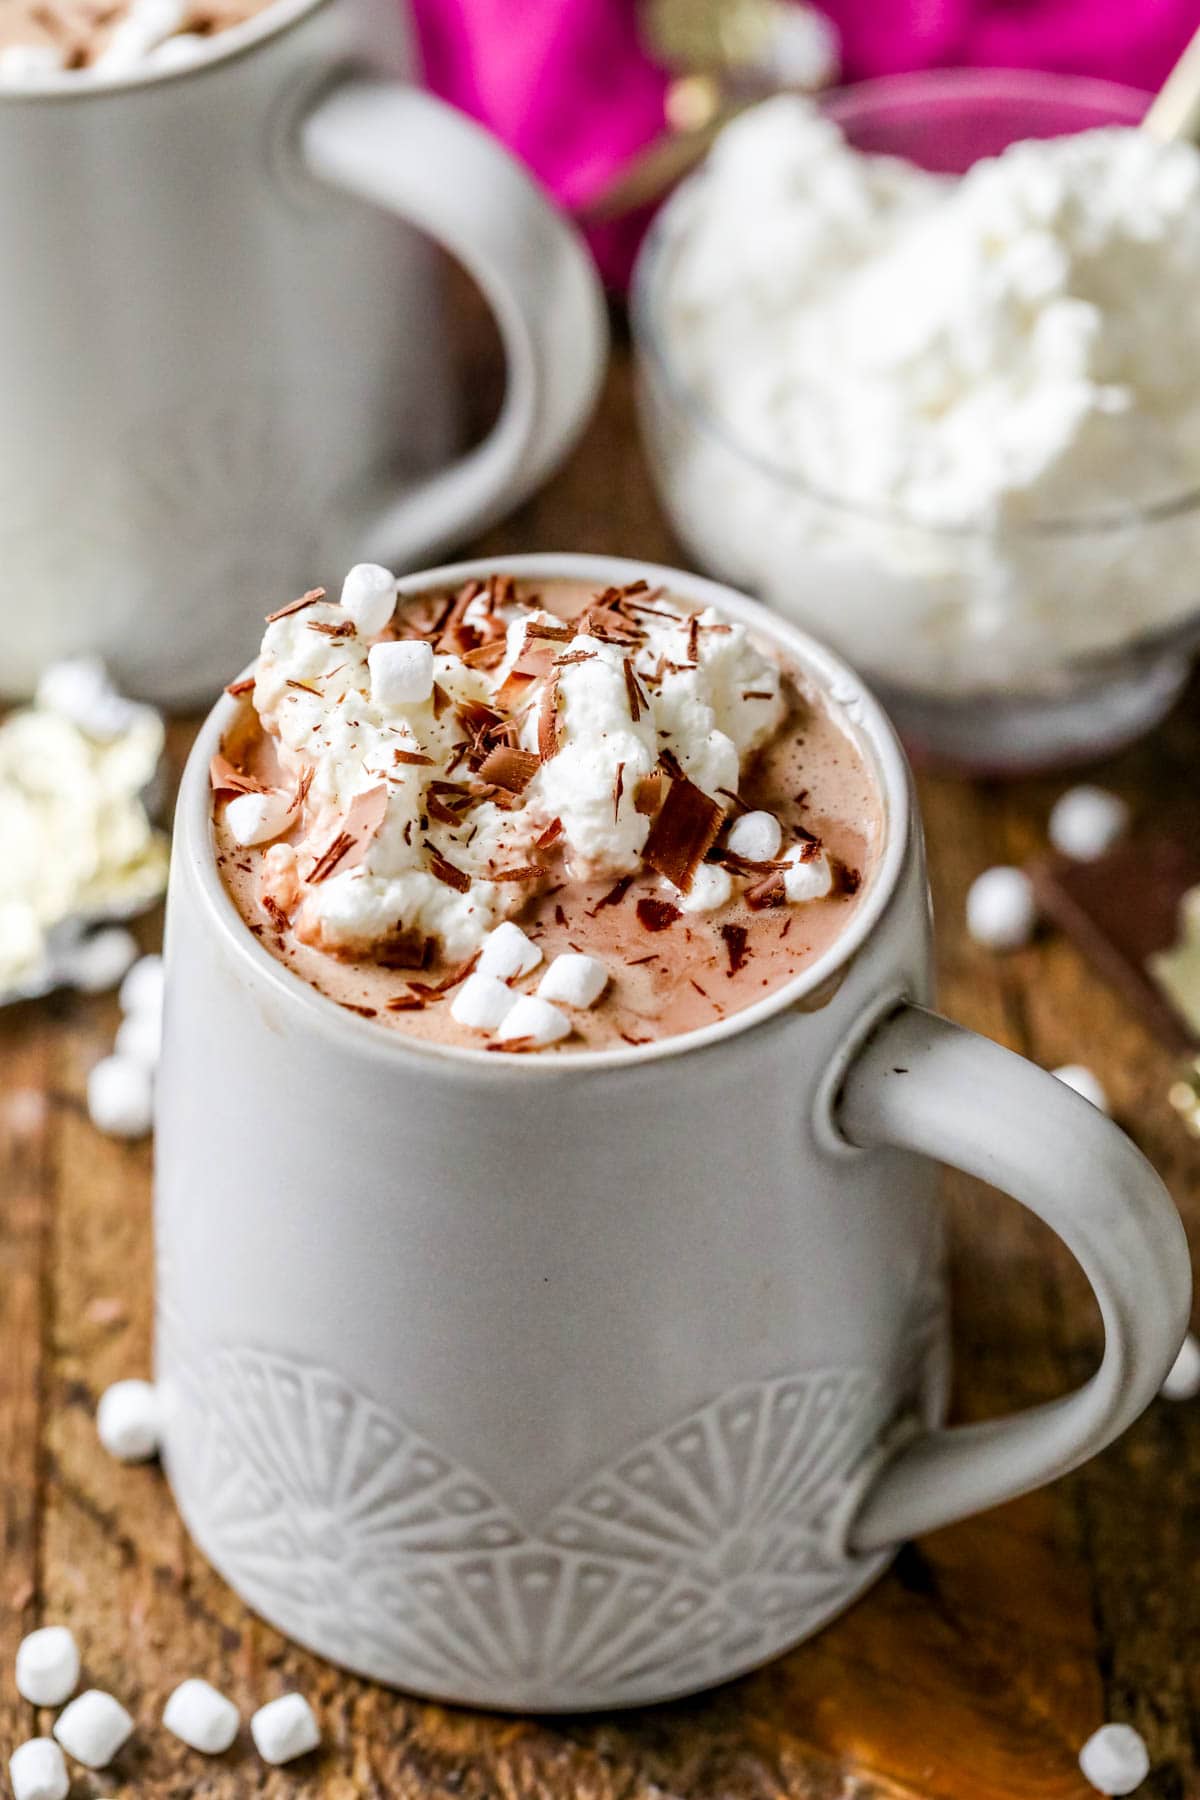 Cup of hot cocoa topped with marshmallows, whipped cream, and chocolate shavings.